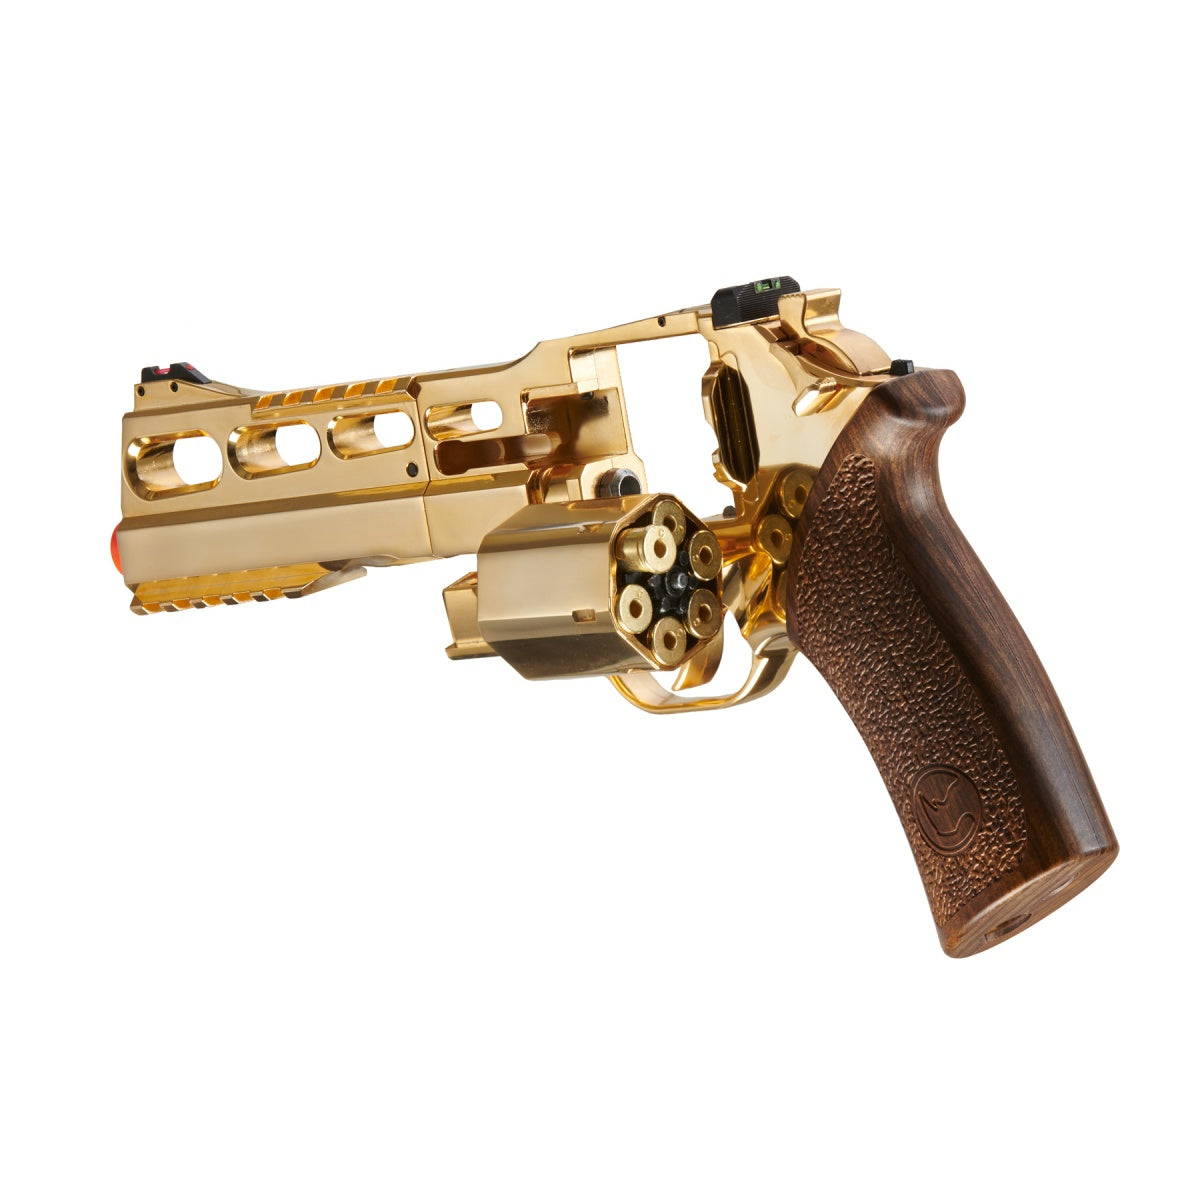 Limited Edition Gold Airsoft Chiappa Rhino 60DS CO2 Revolver - ssairsoft